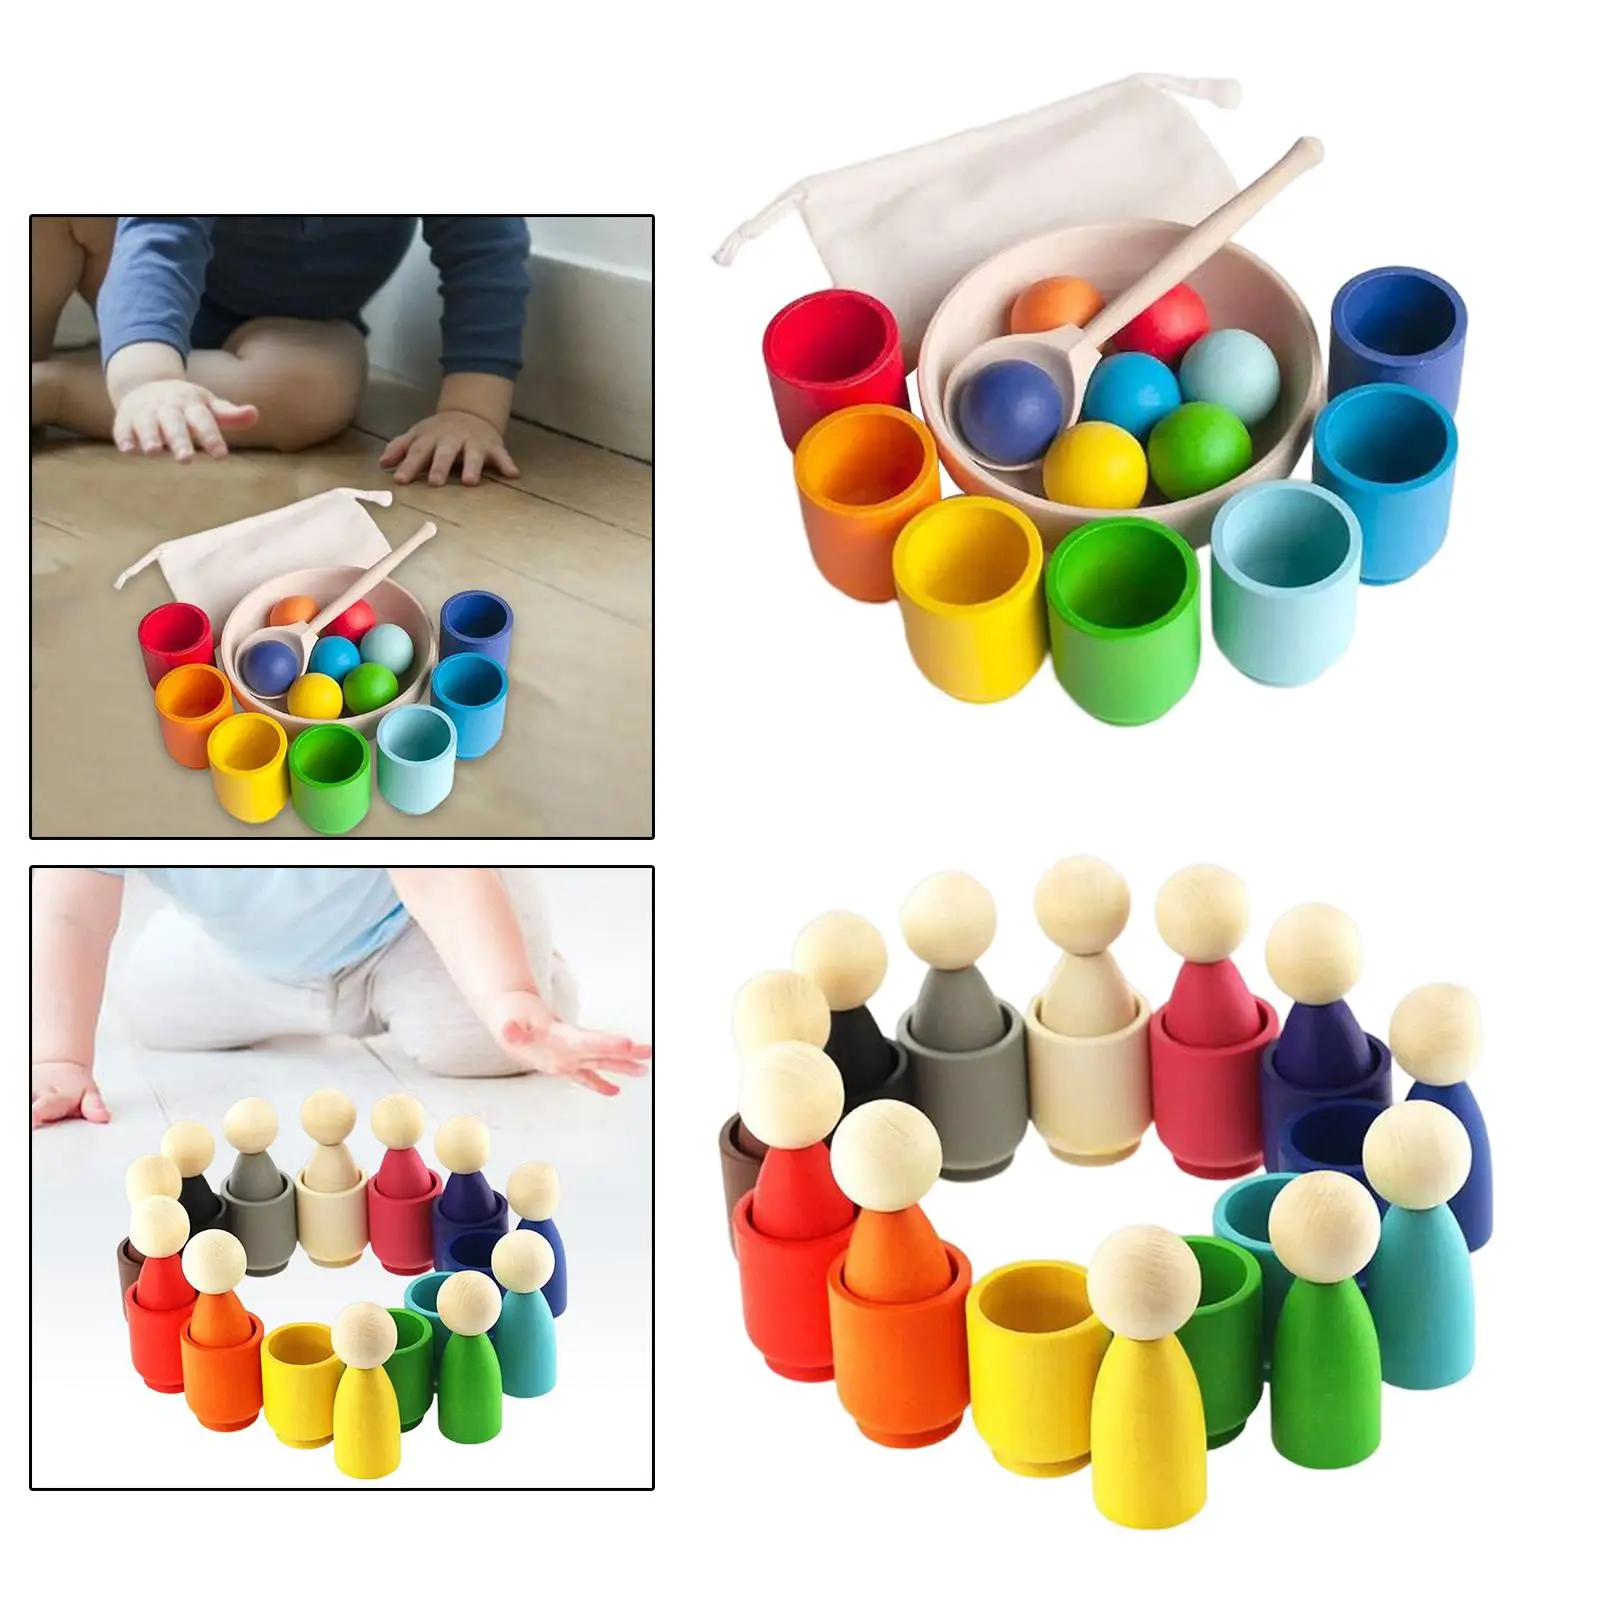 Toddlers Balls in Cups Montessori Color Sorting and Counting Board Game Preschool Learning Toy for 1+ Year Old Kids Children